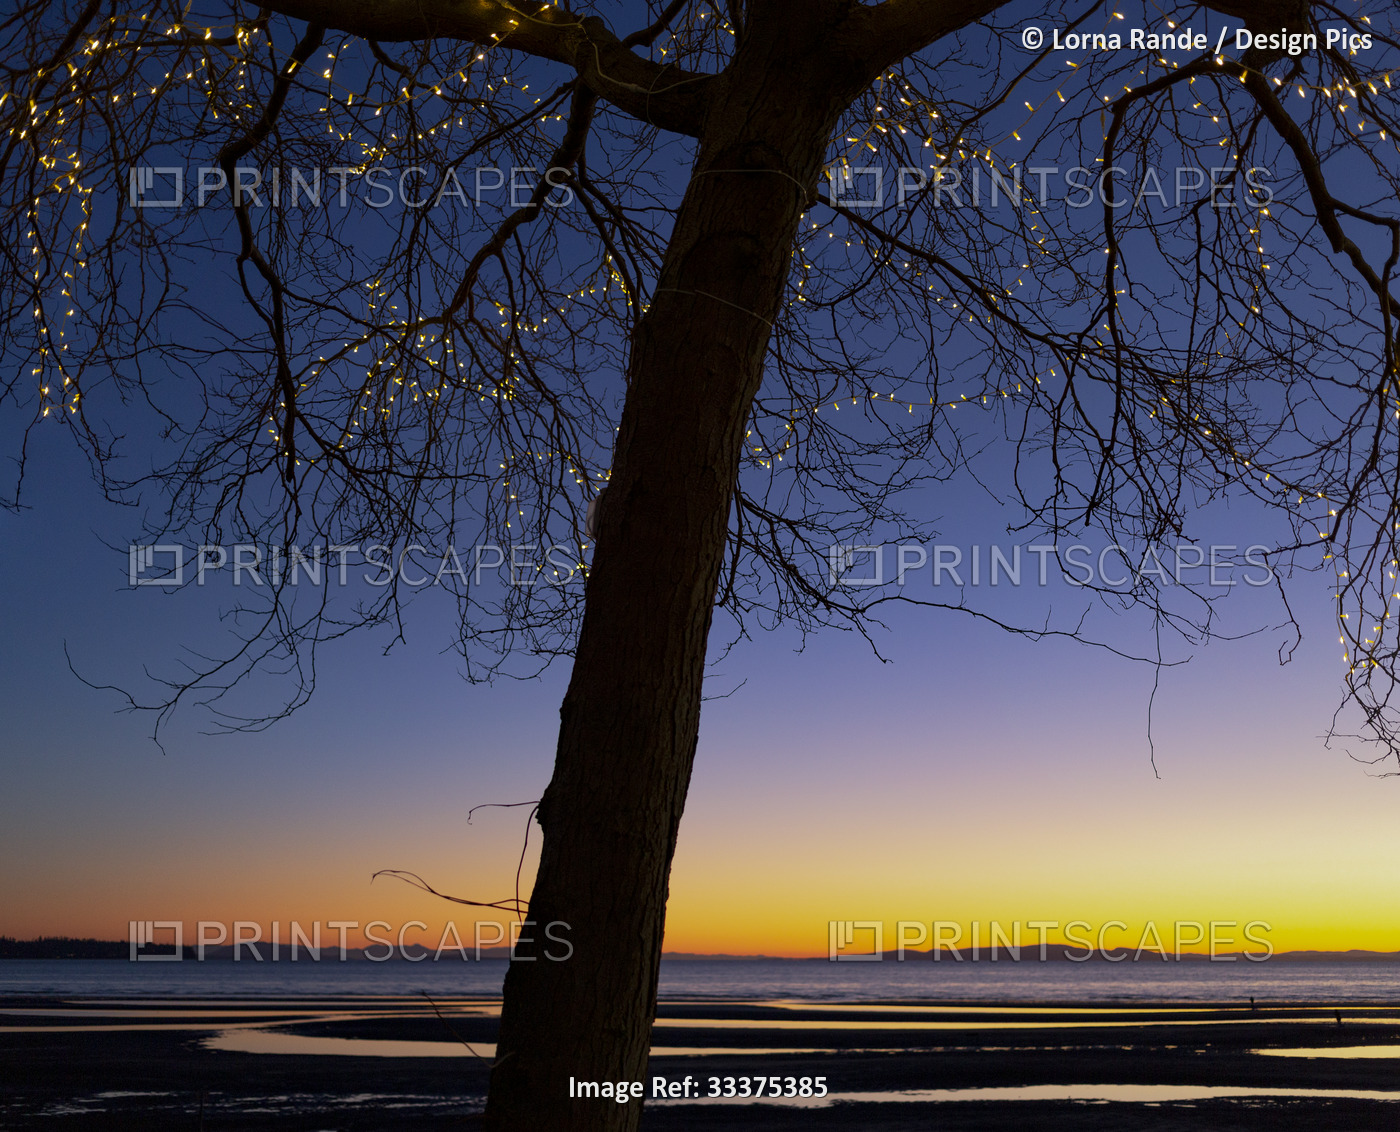 White lights in a leafless tree on a beach with a golden sunset glowing over ...